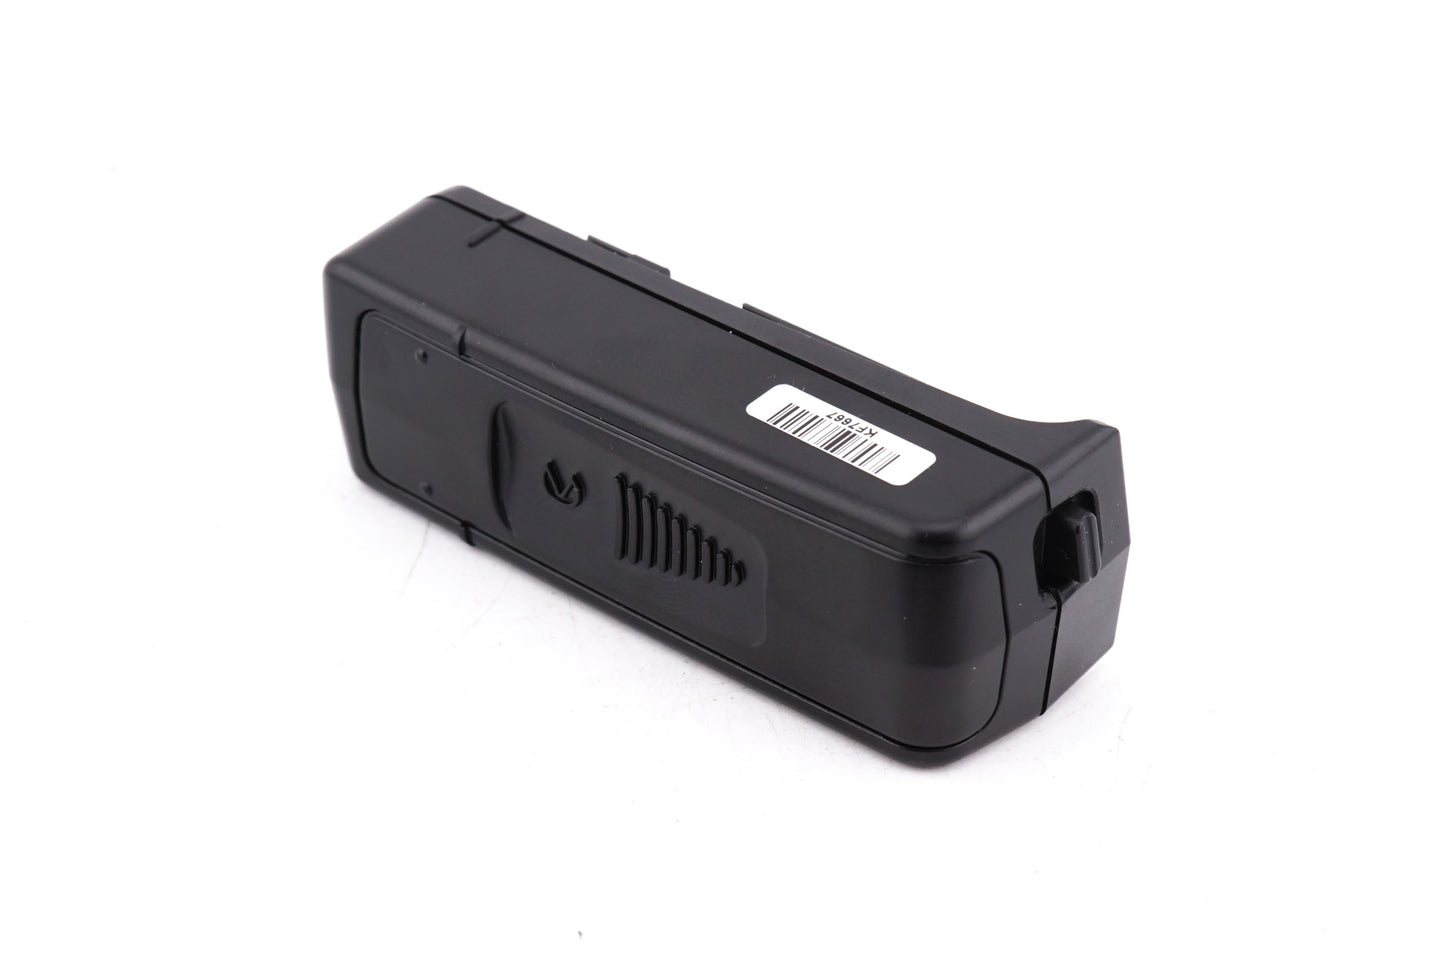 Nikon SD-800 Quick Recycling Battery Pack - Accessory